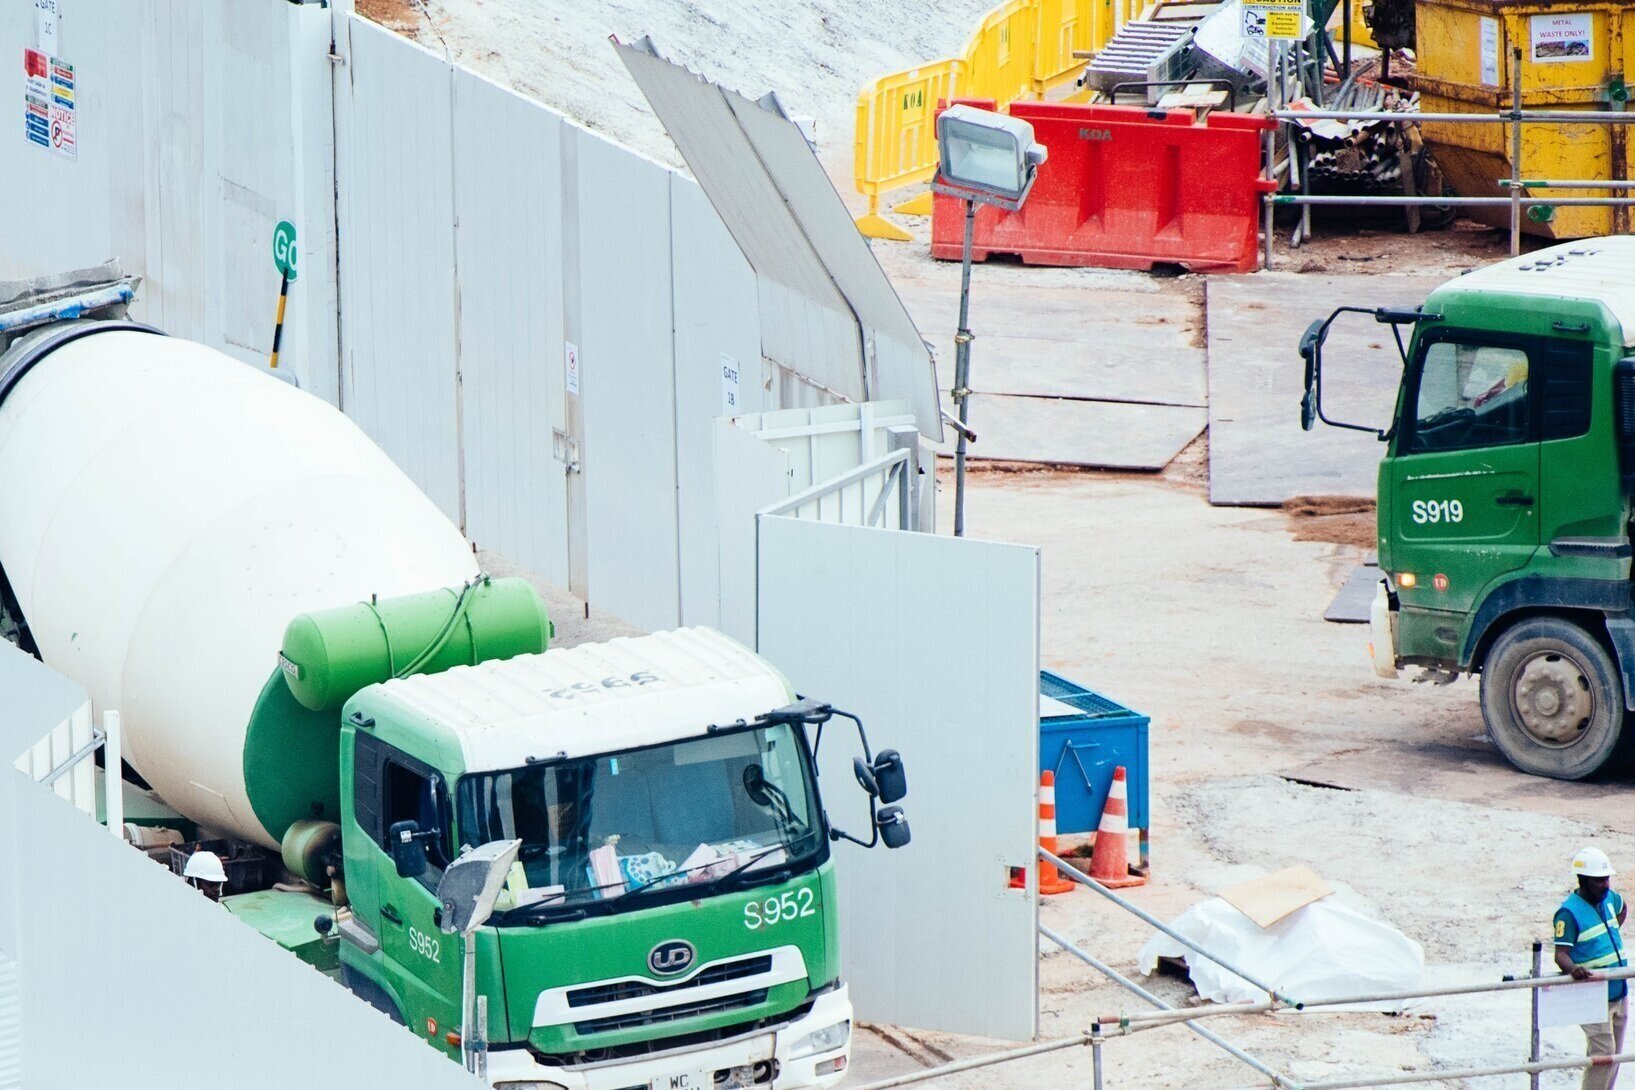 [Green Island Cement] Cementing solid relationships with Green Island Cement’s stakeholders